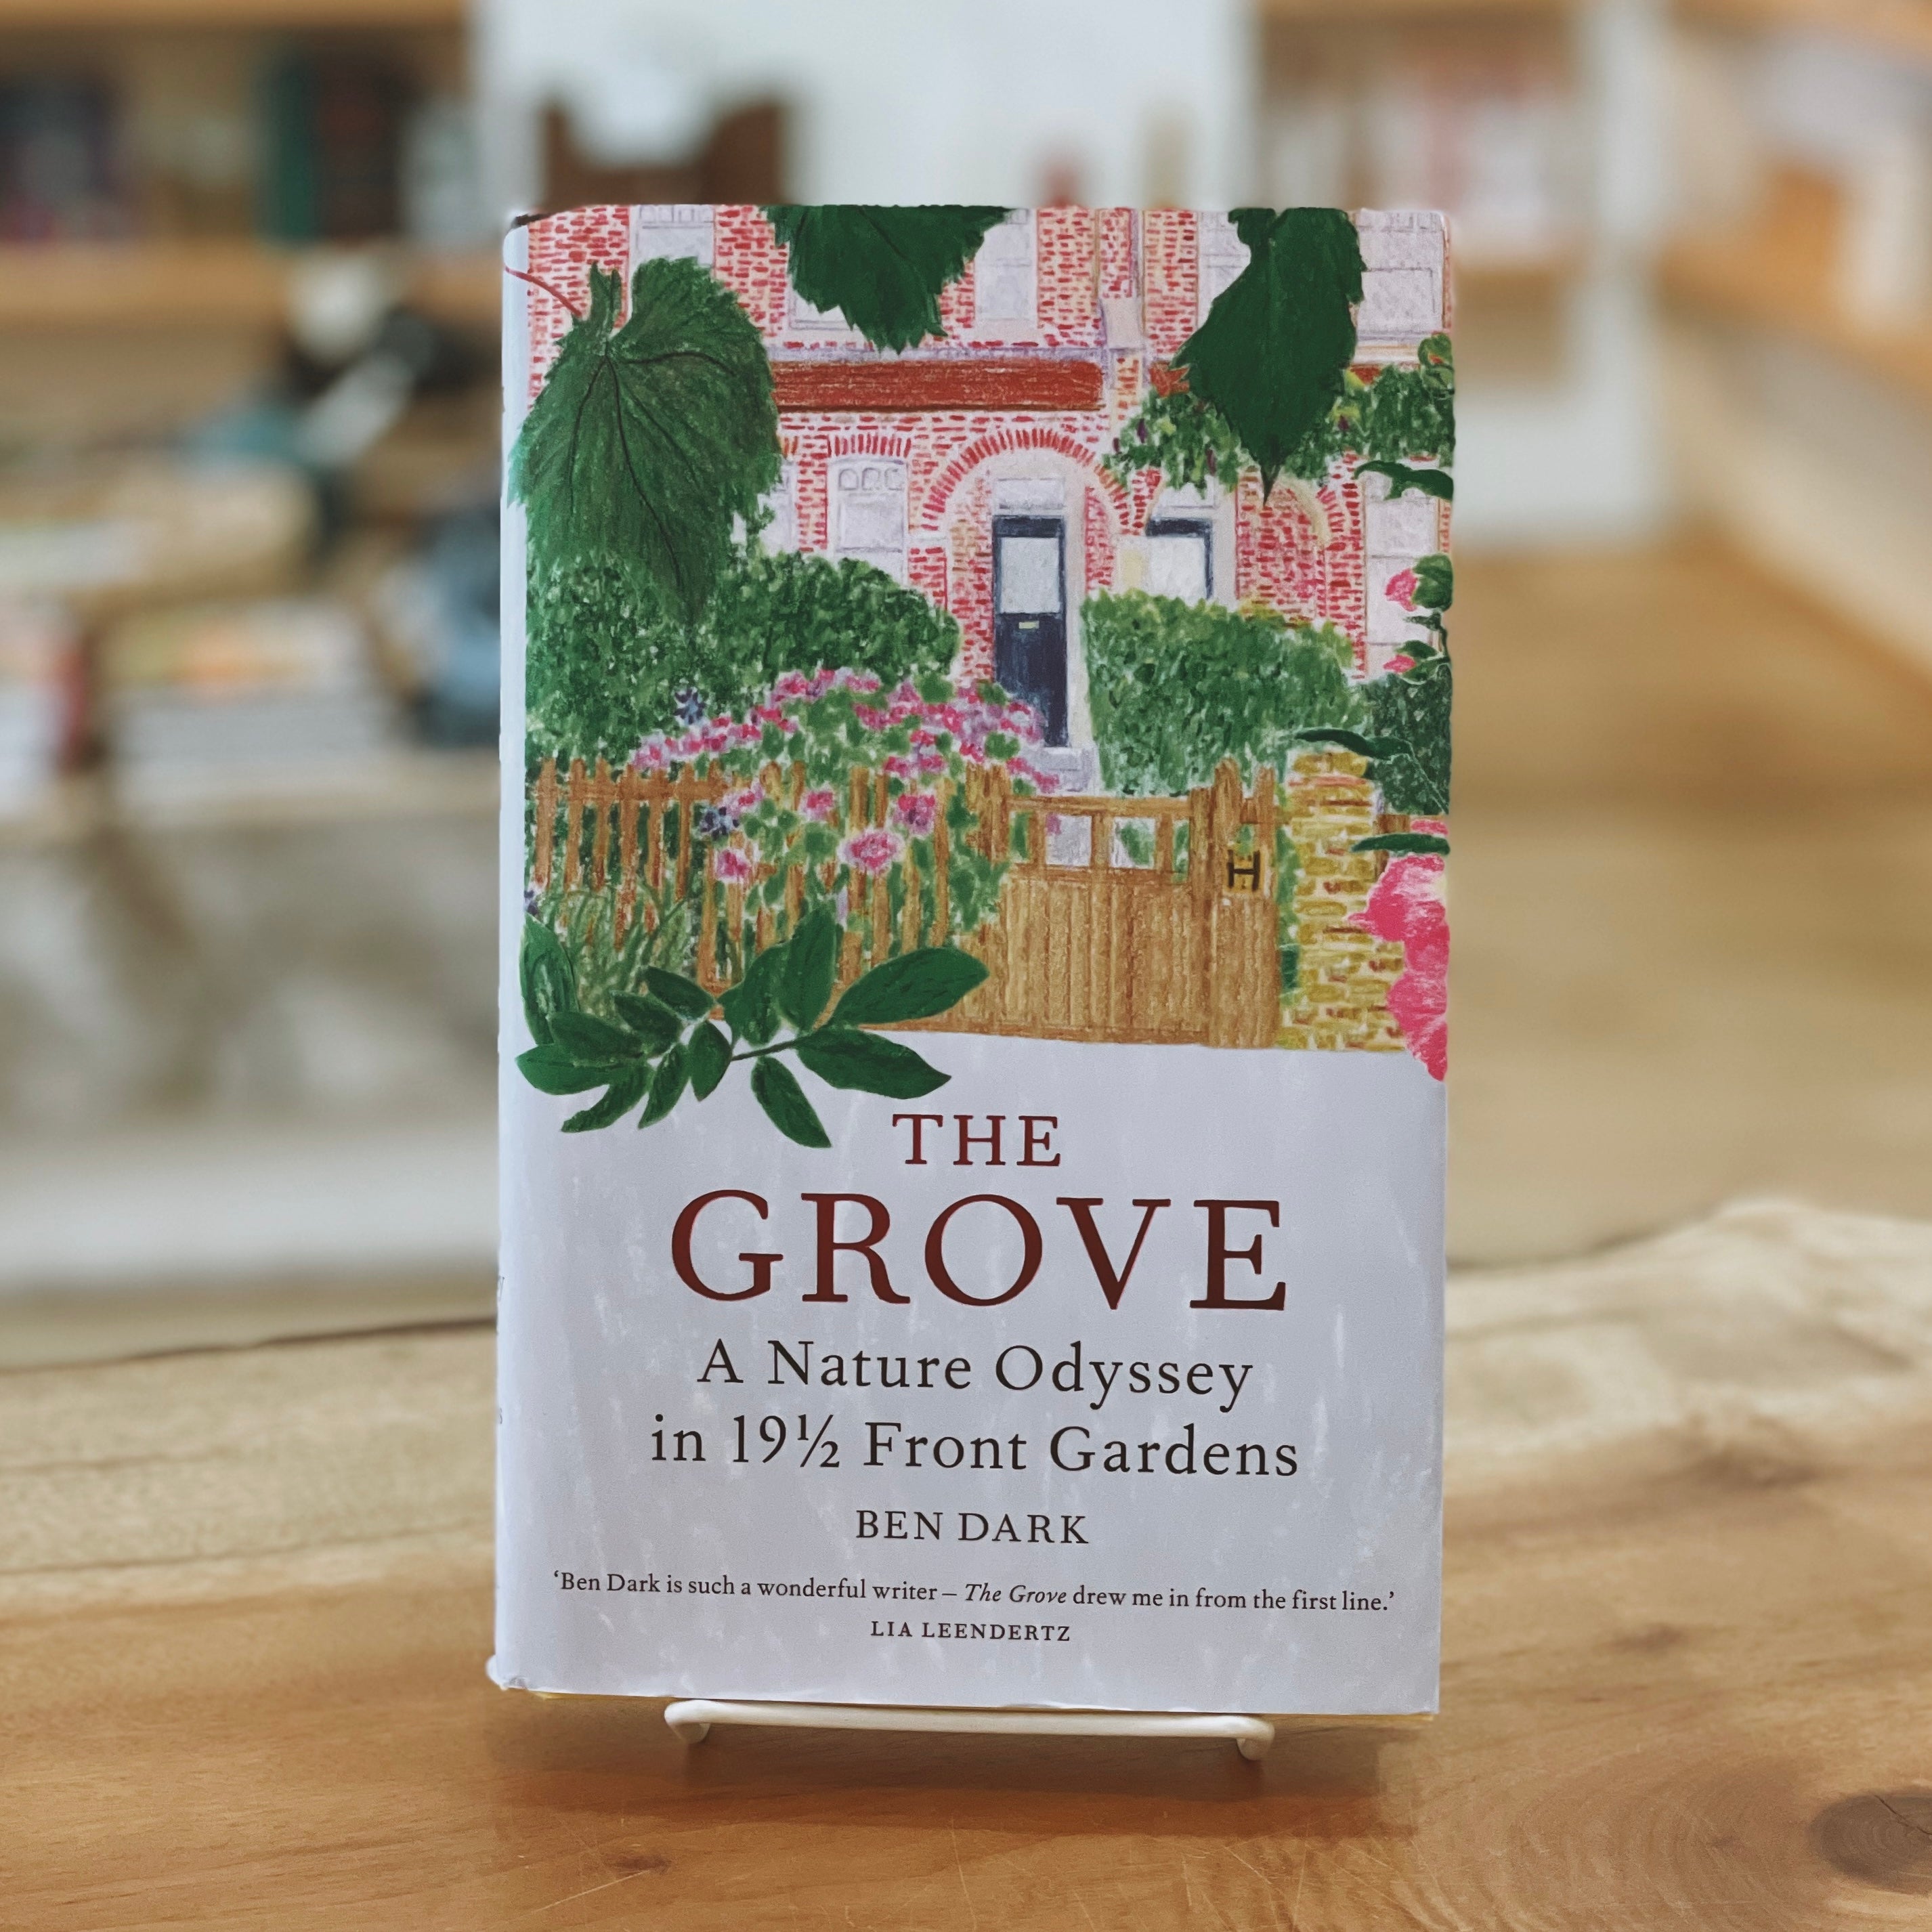 The Grove: A History of Everything in 19 ½ Front Gardens